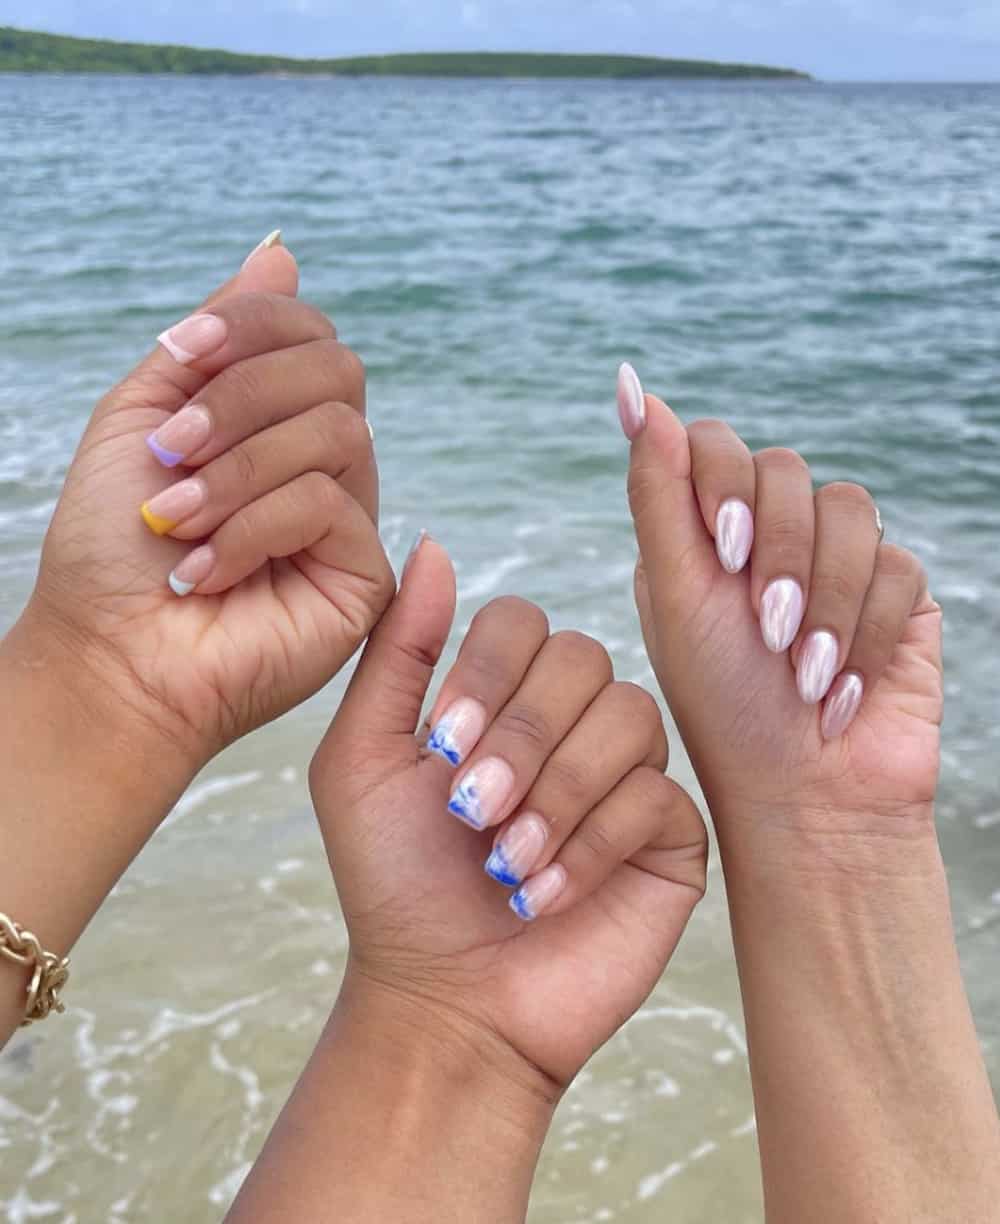 Three hands in front of the ocean with different manicures, one with glazed donut nails, one with gradient French tips, and one with ocean wave French tips